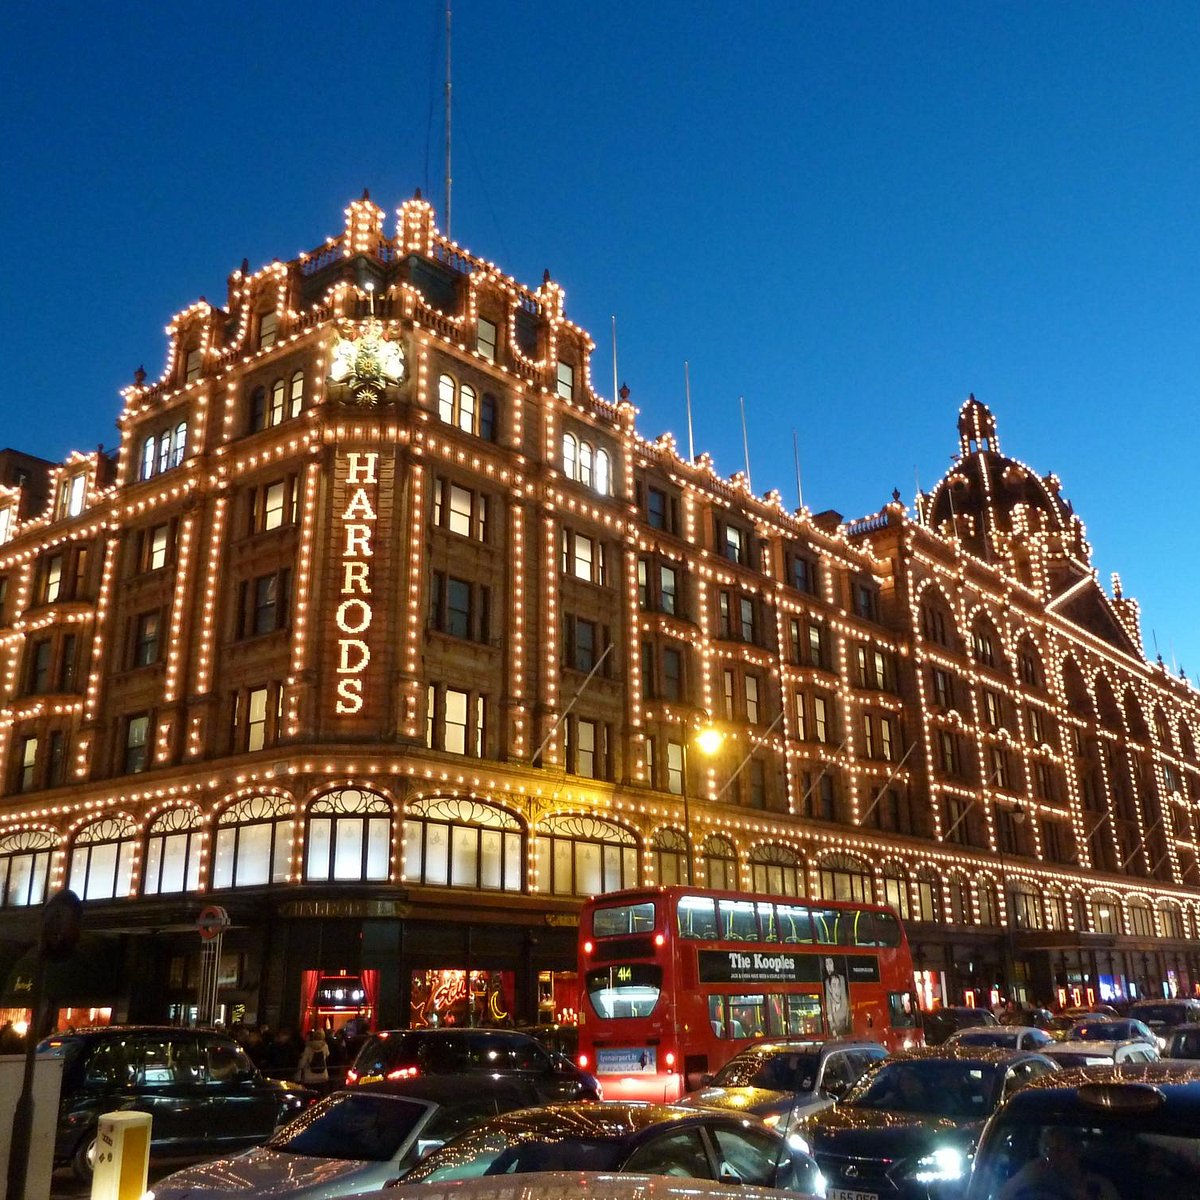 Harrods London All You Need to Know BEFORE You Go